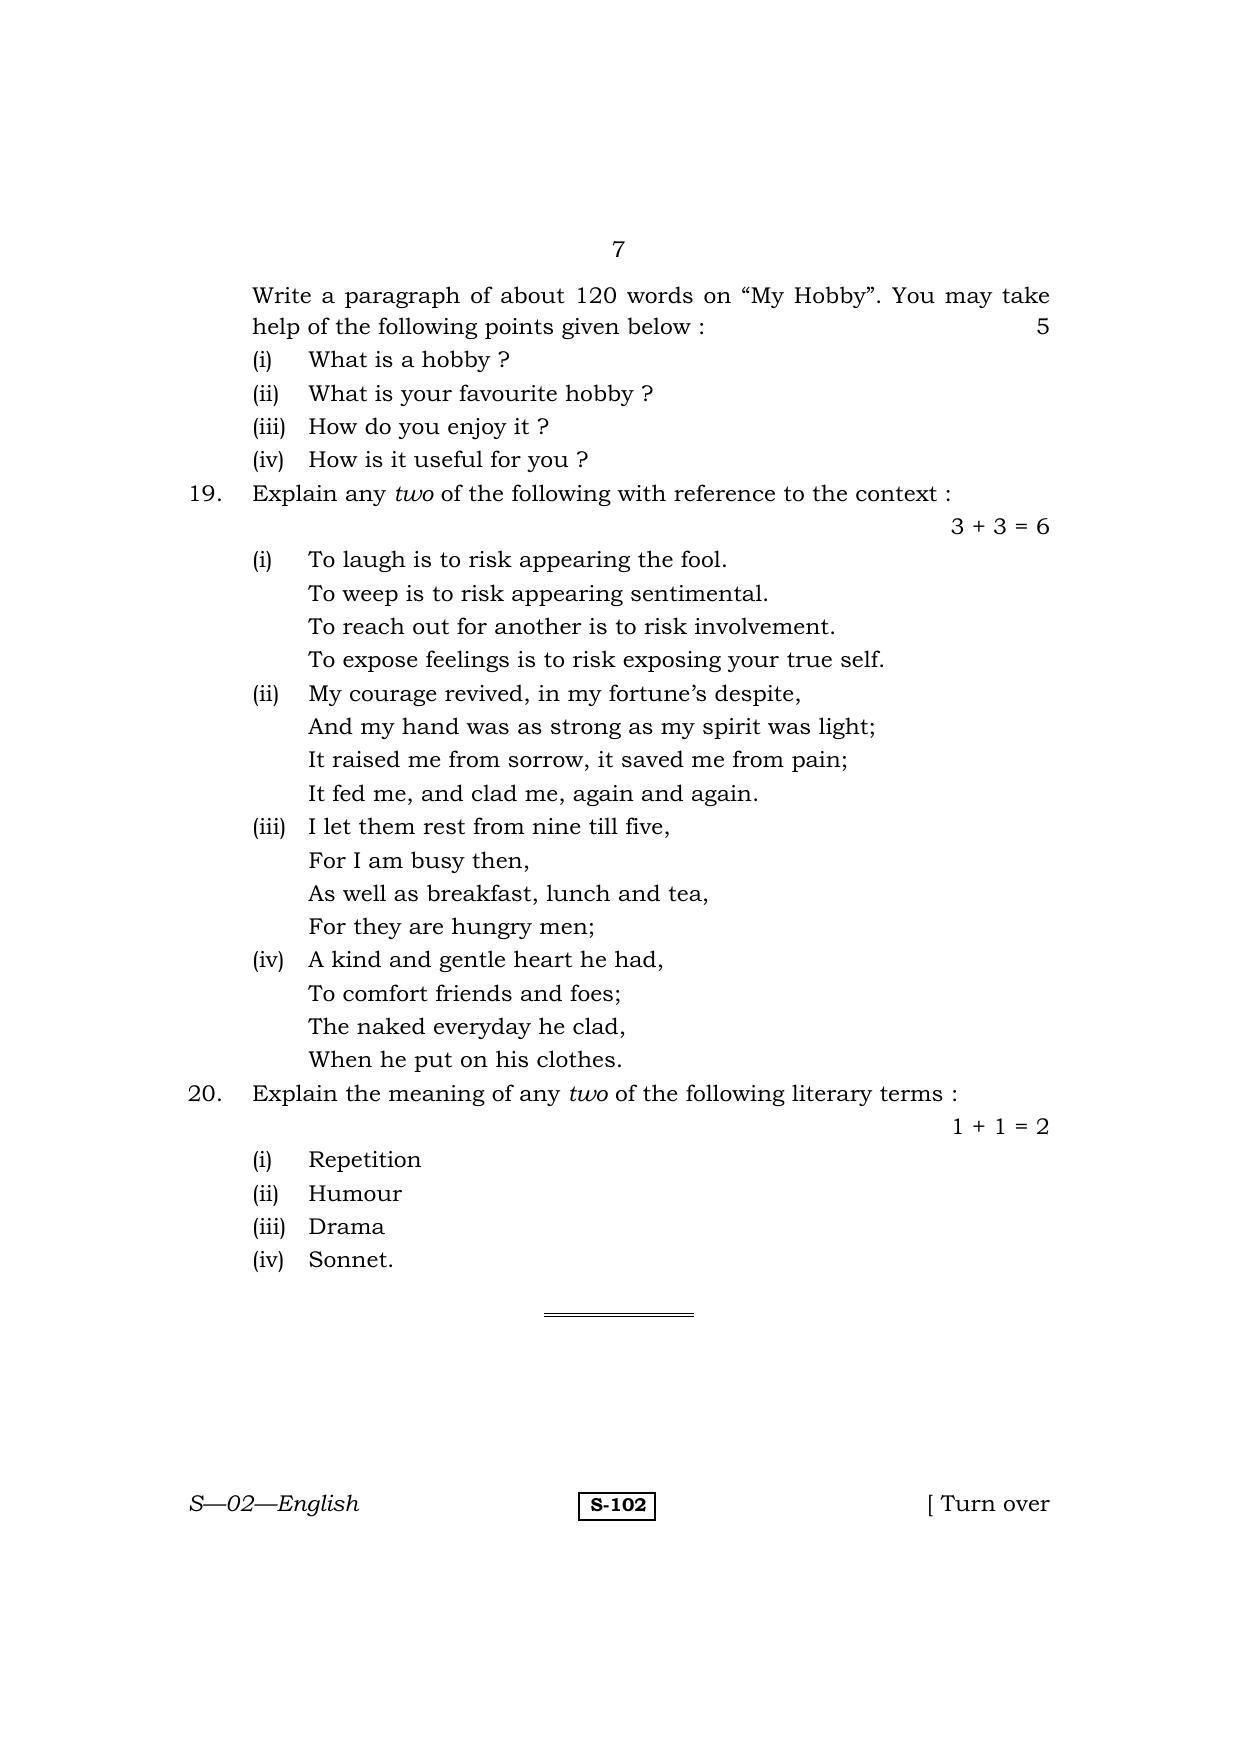 RBSE Class 10 English 2011 Question Paper - Page 7